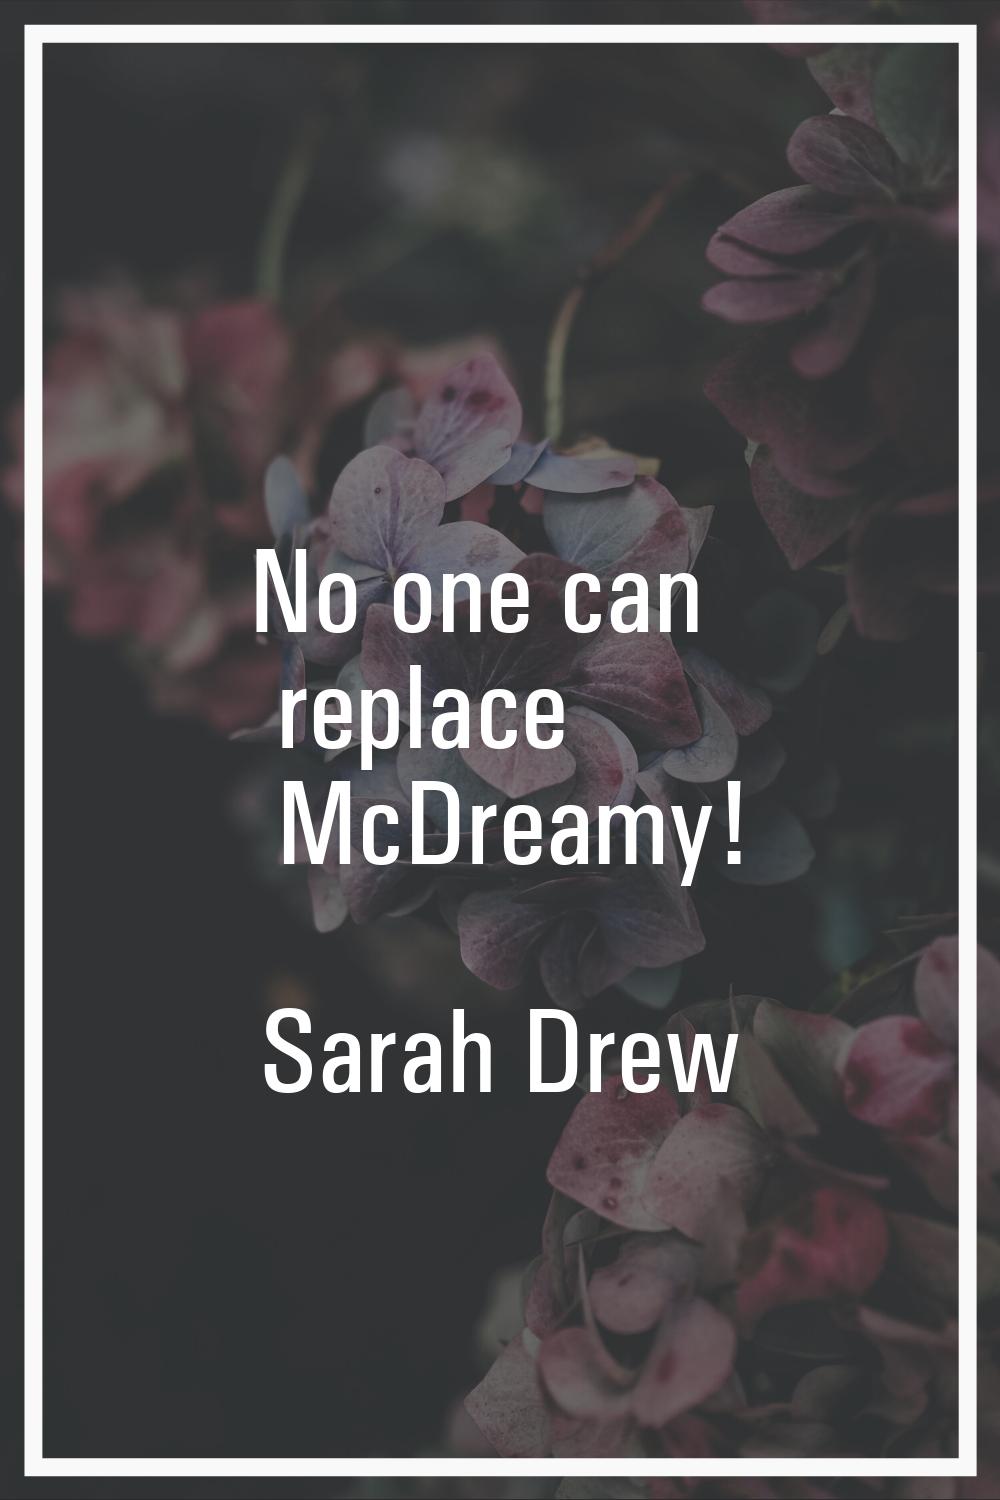 No one can replace McDreamy!